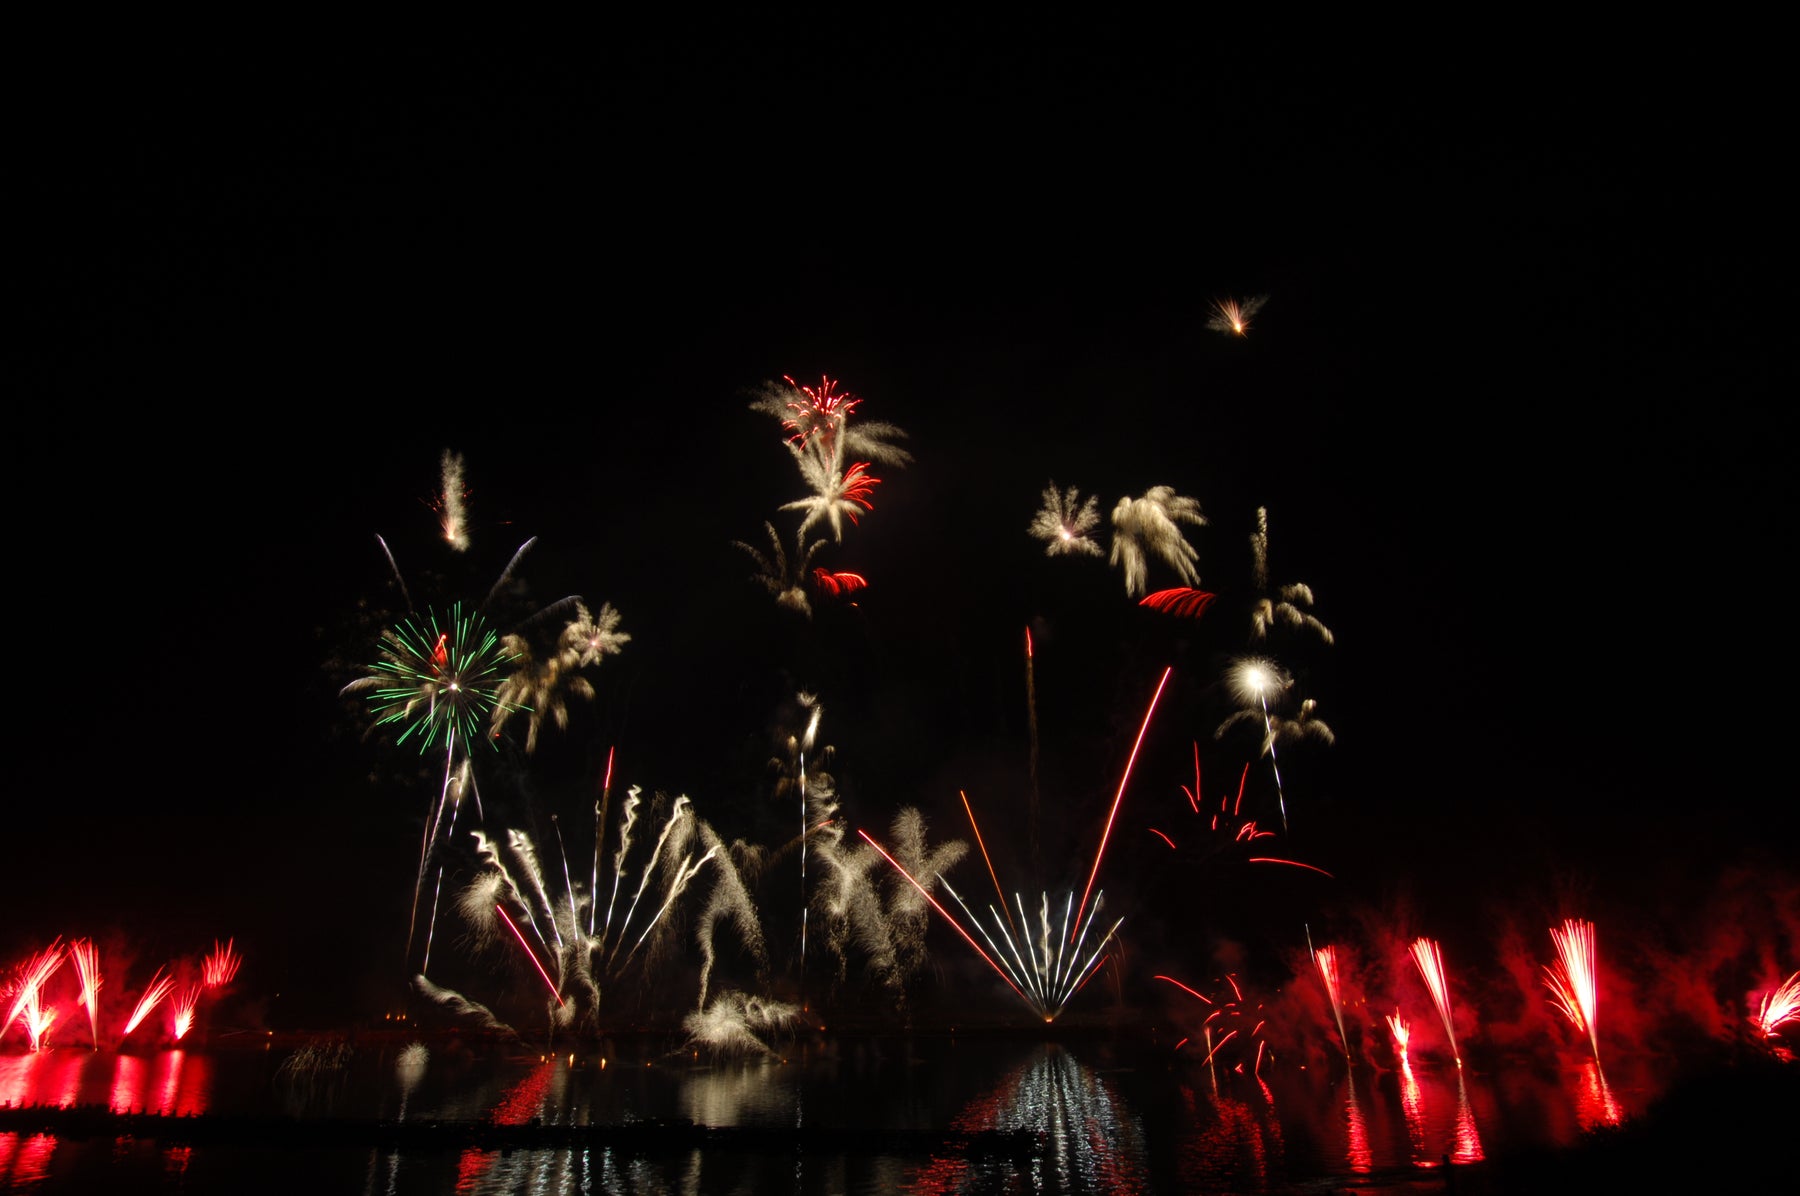 PHOTOGRAPHING FIREWORKS WITH YOUR SMARTPHONE